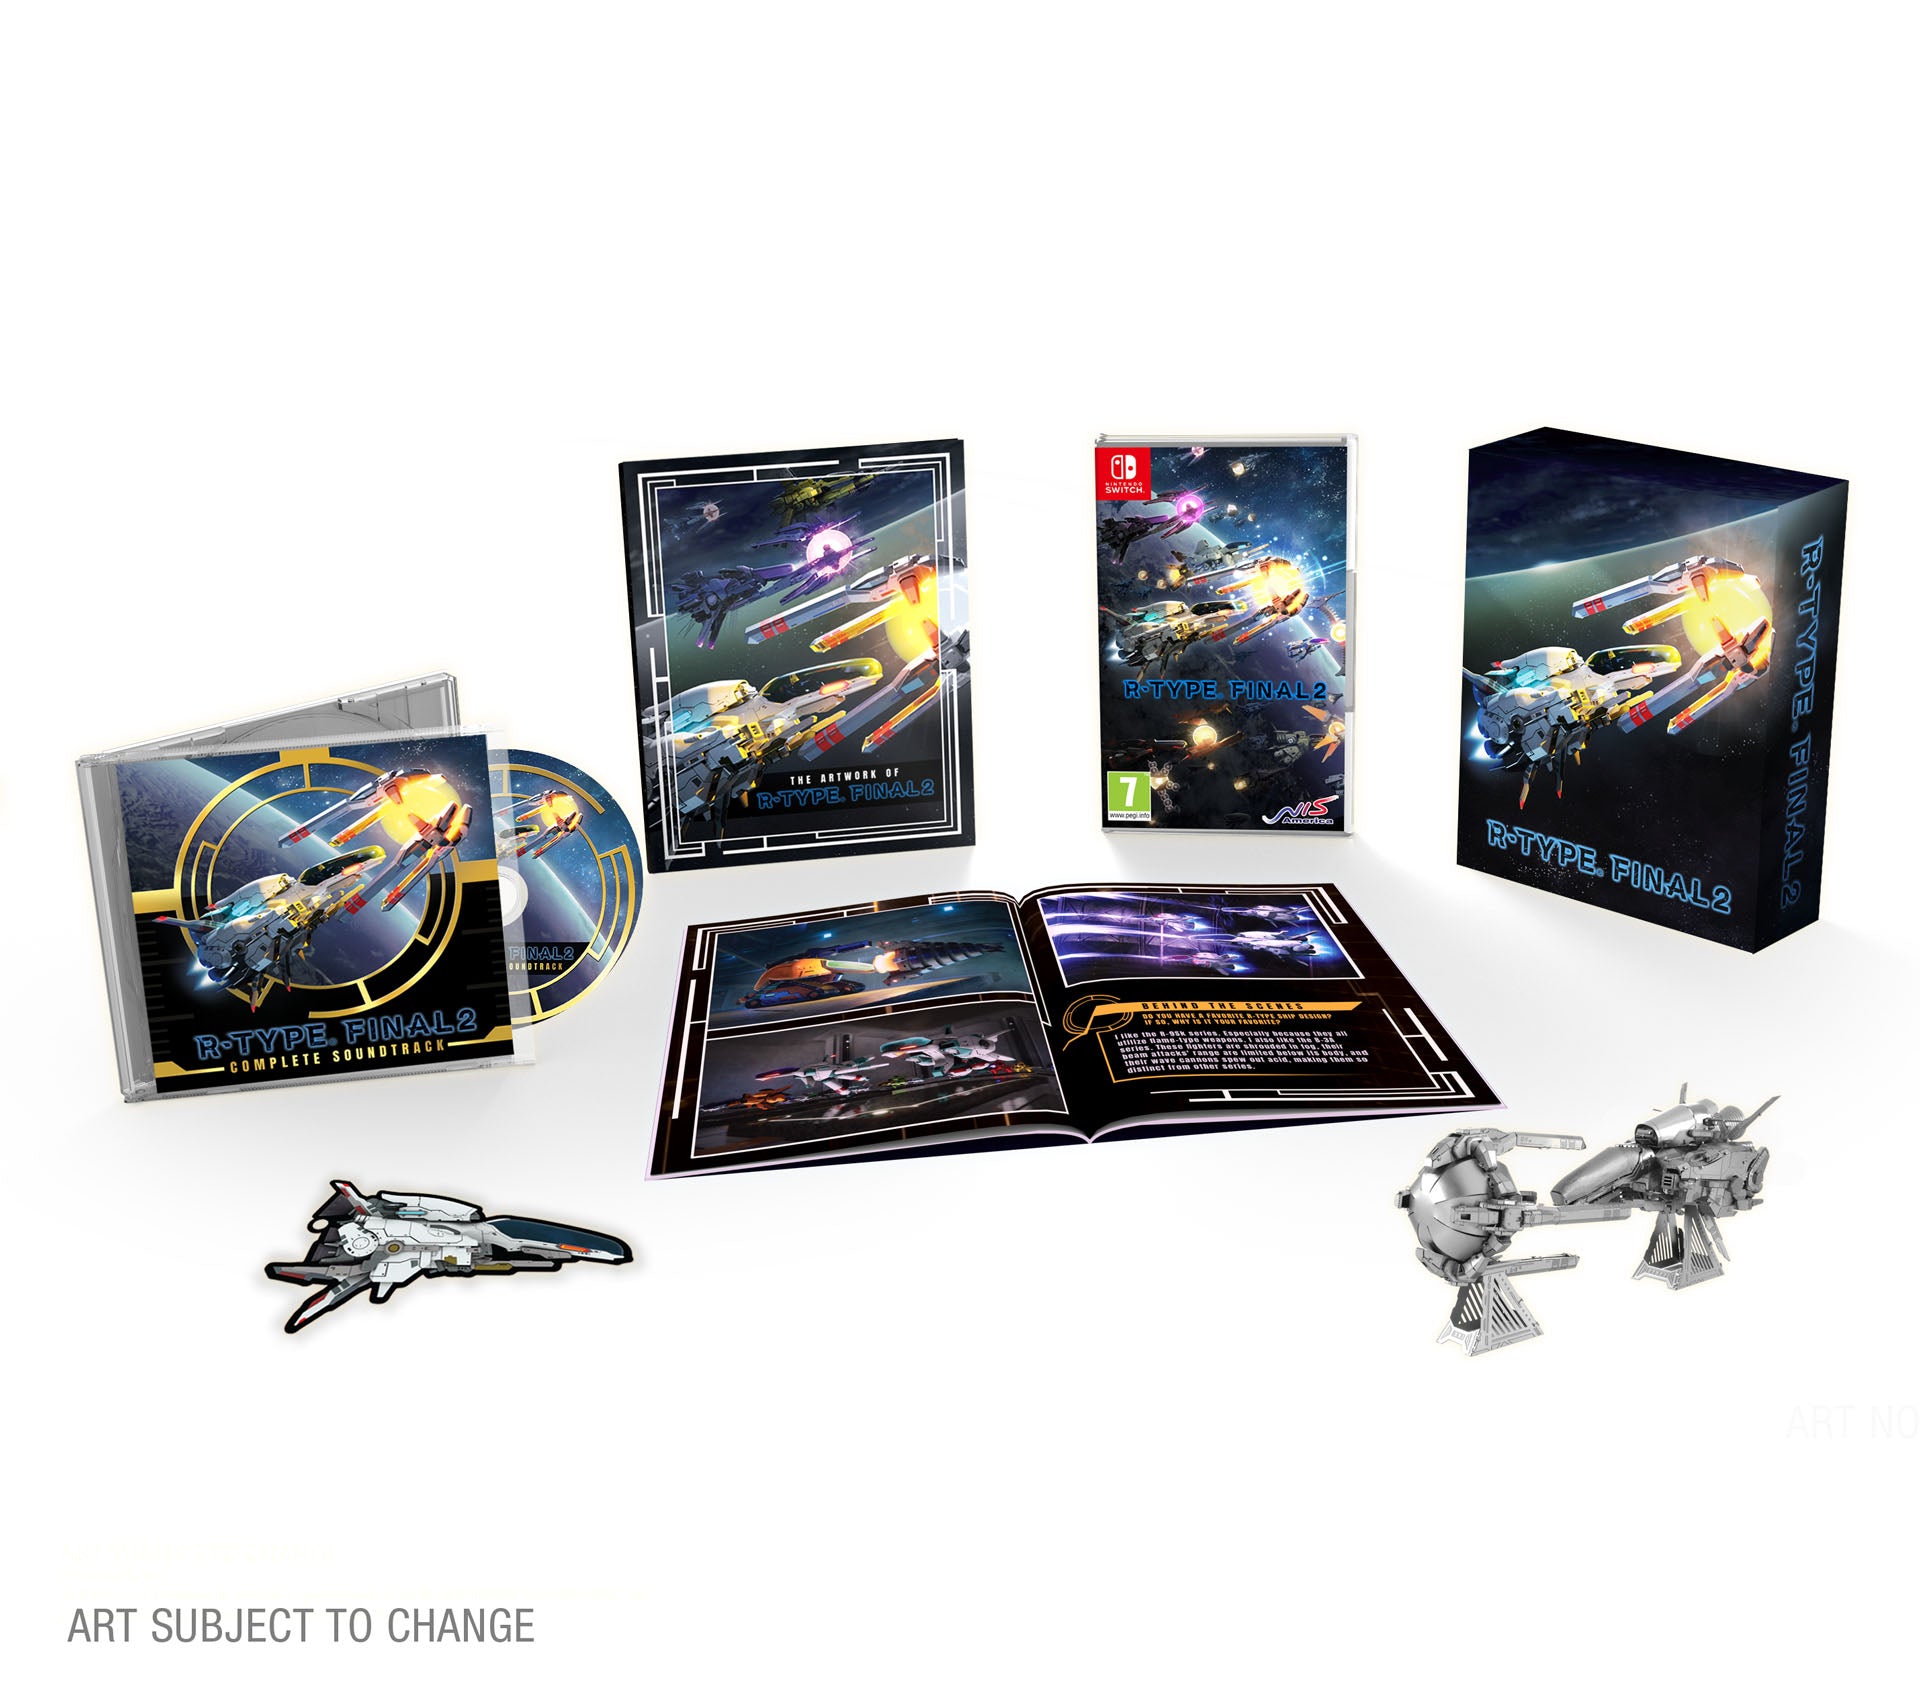 R-Type® Final 2 - Limited Edition - Nintendo Switch™